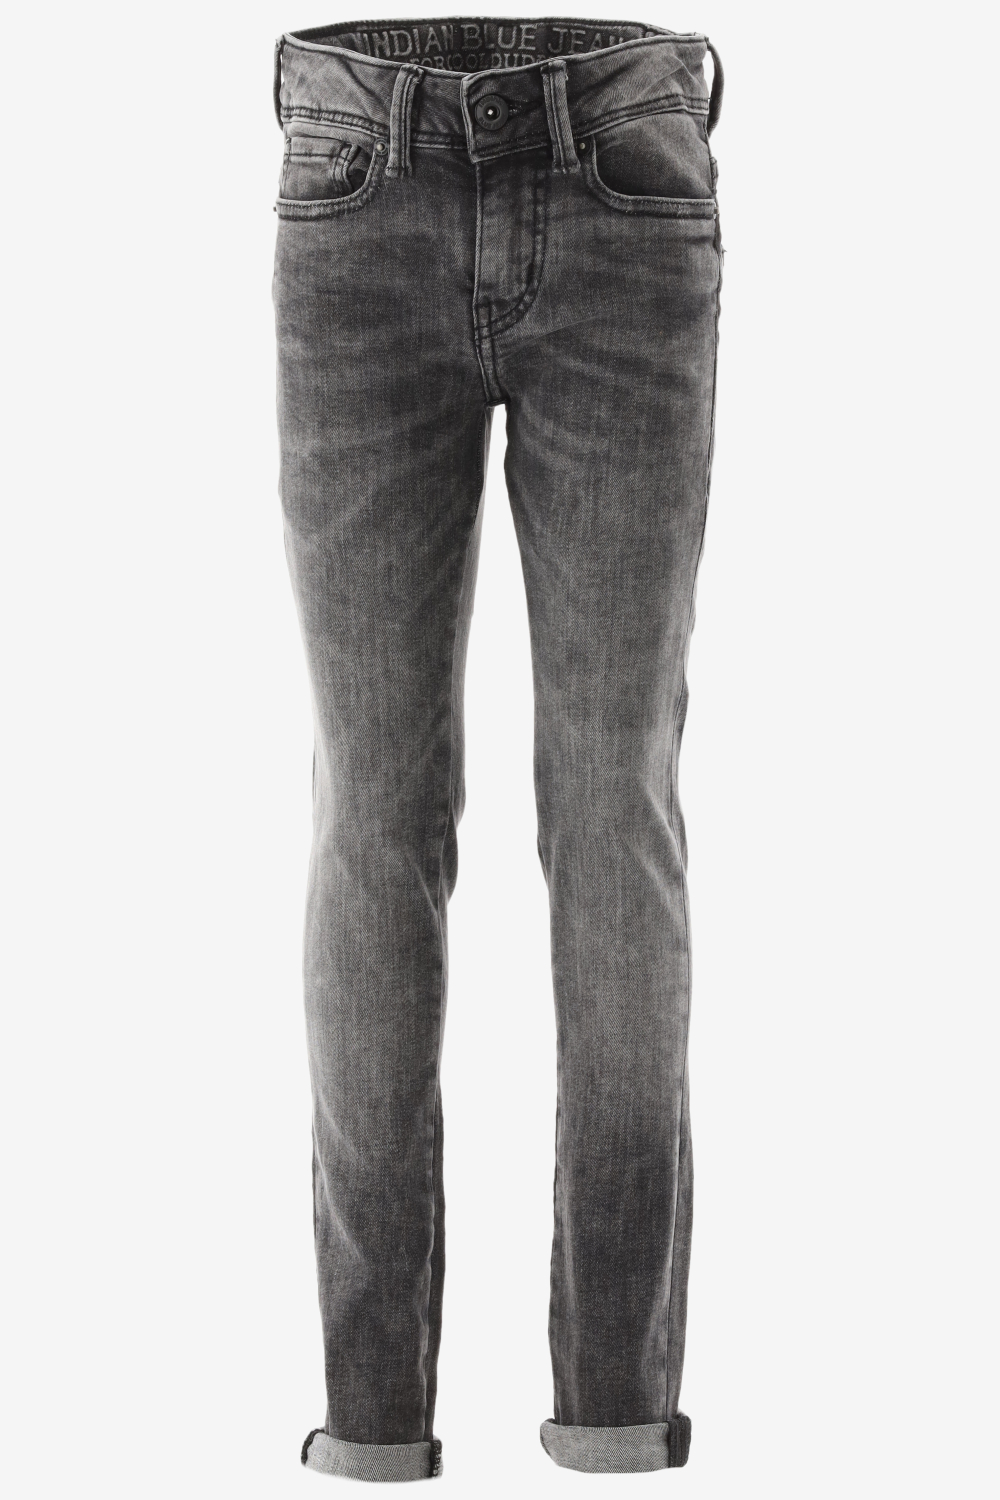 Indian Blue Jeans Grey Max Straight Fit Jeans - Grijs